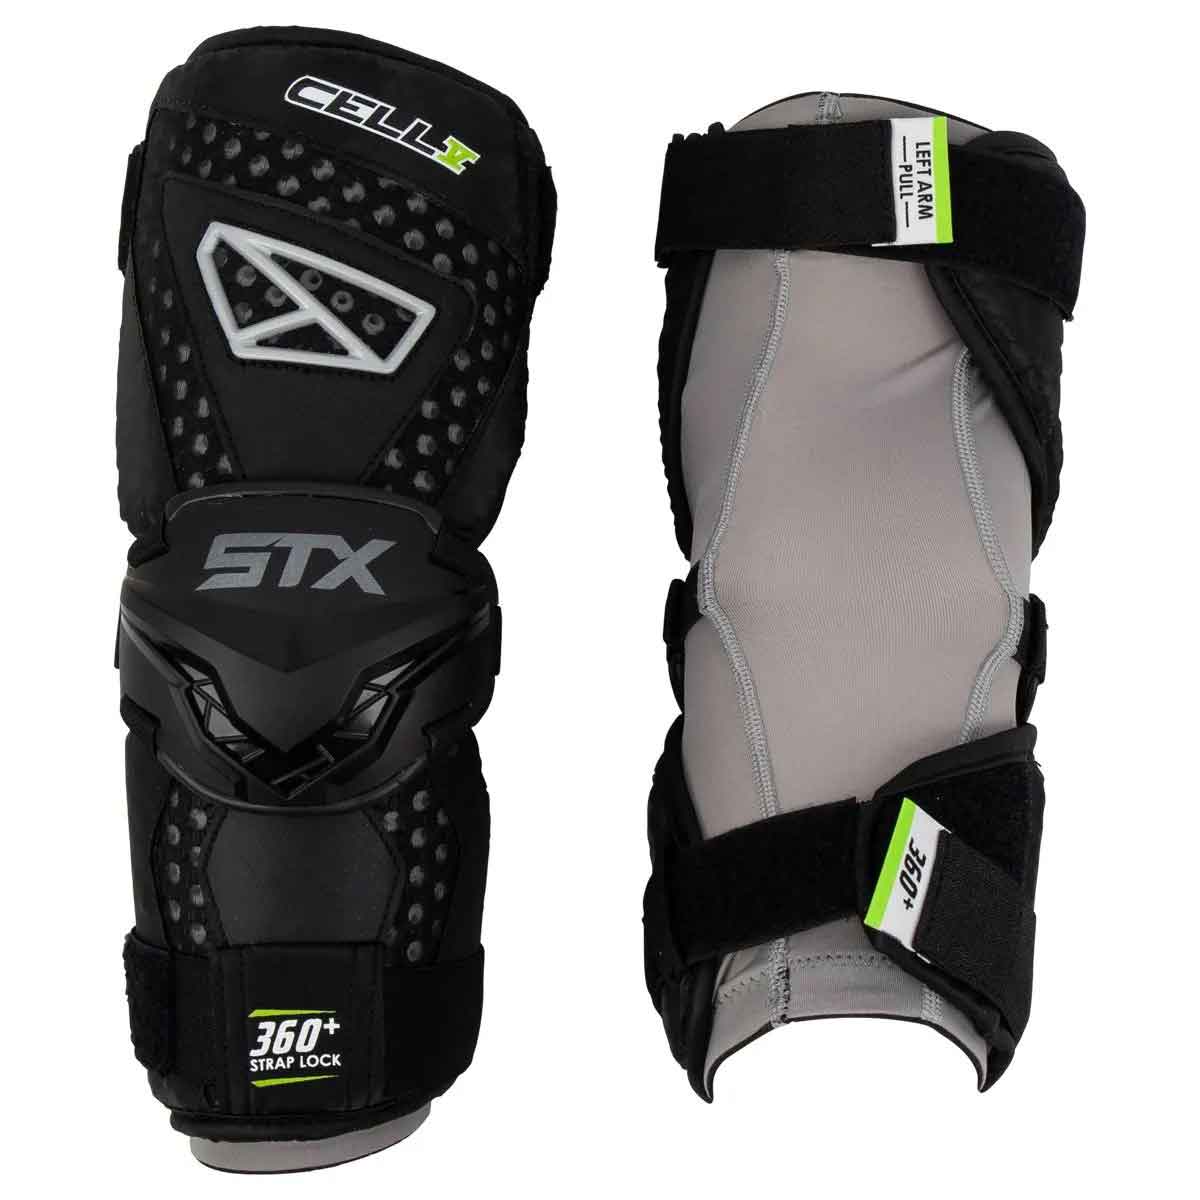 Picture of the black STX Cell V Lacrosse Arm Guards